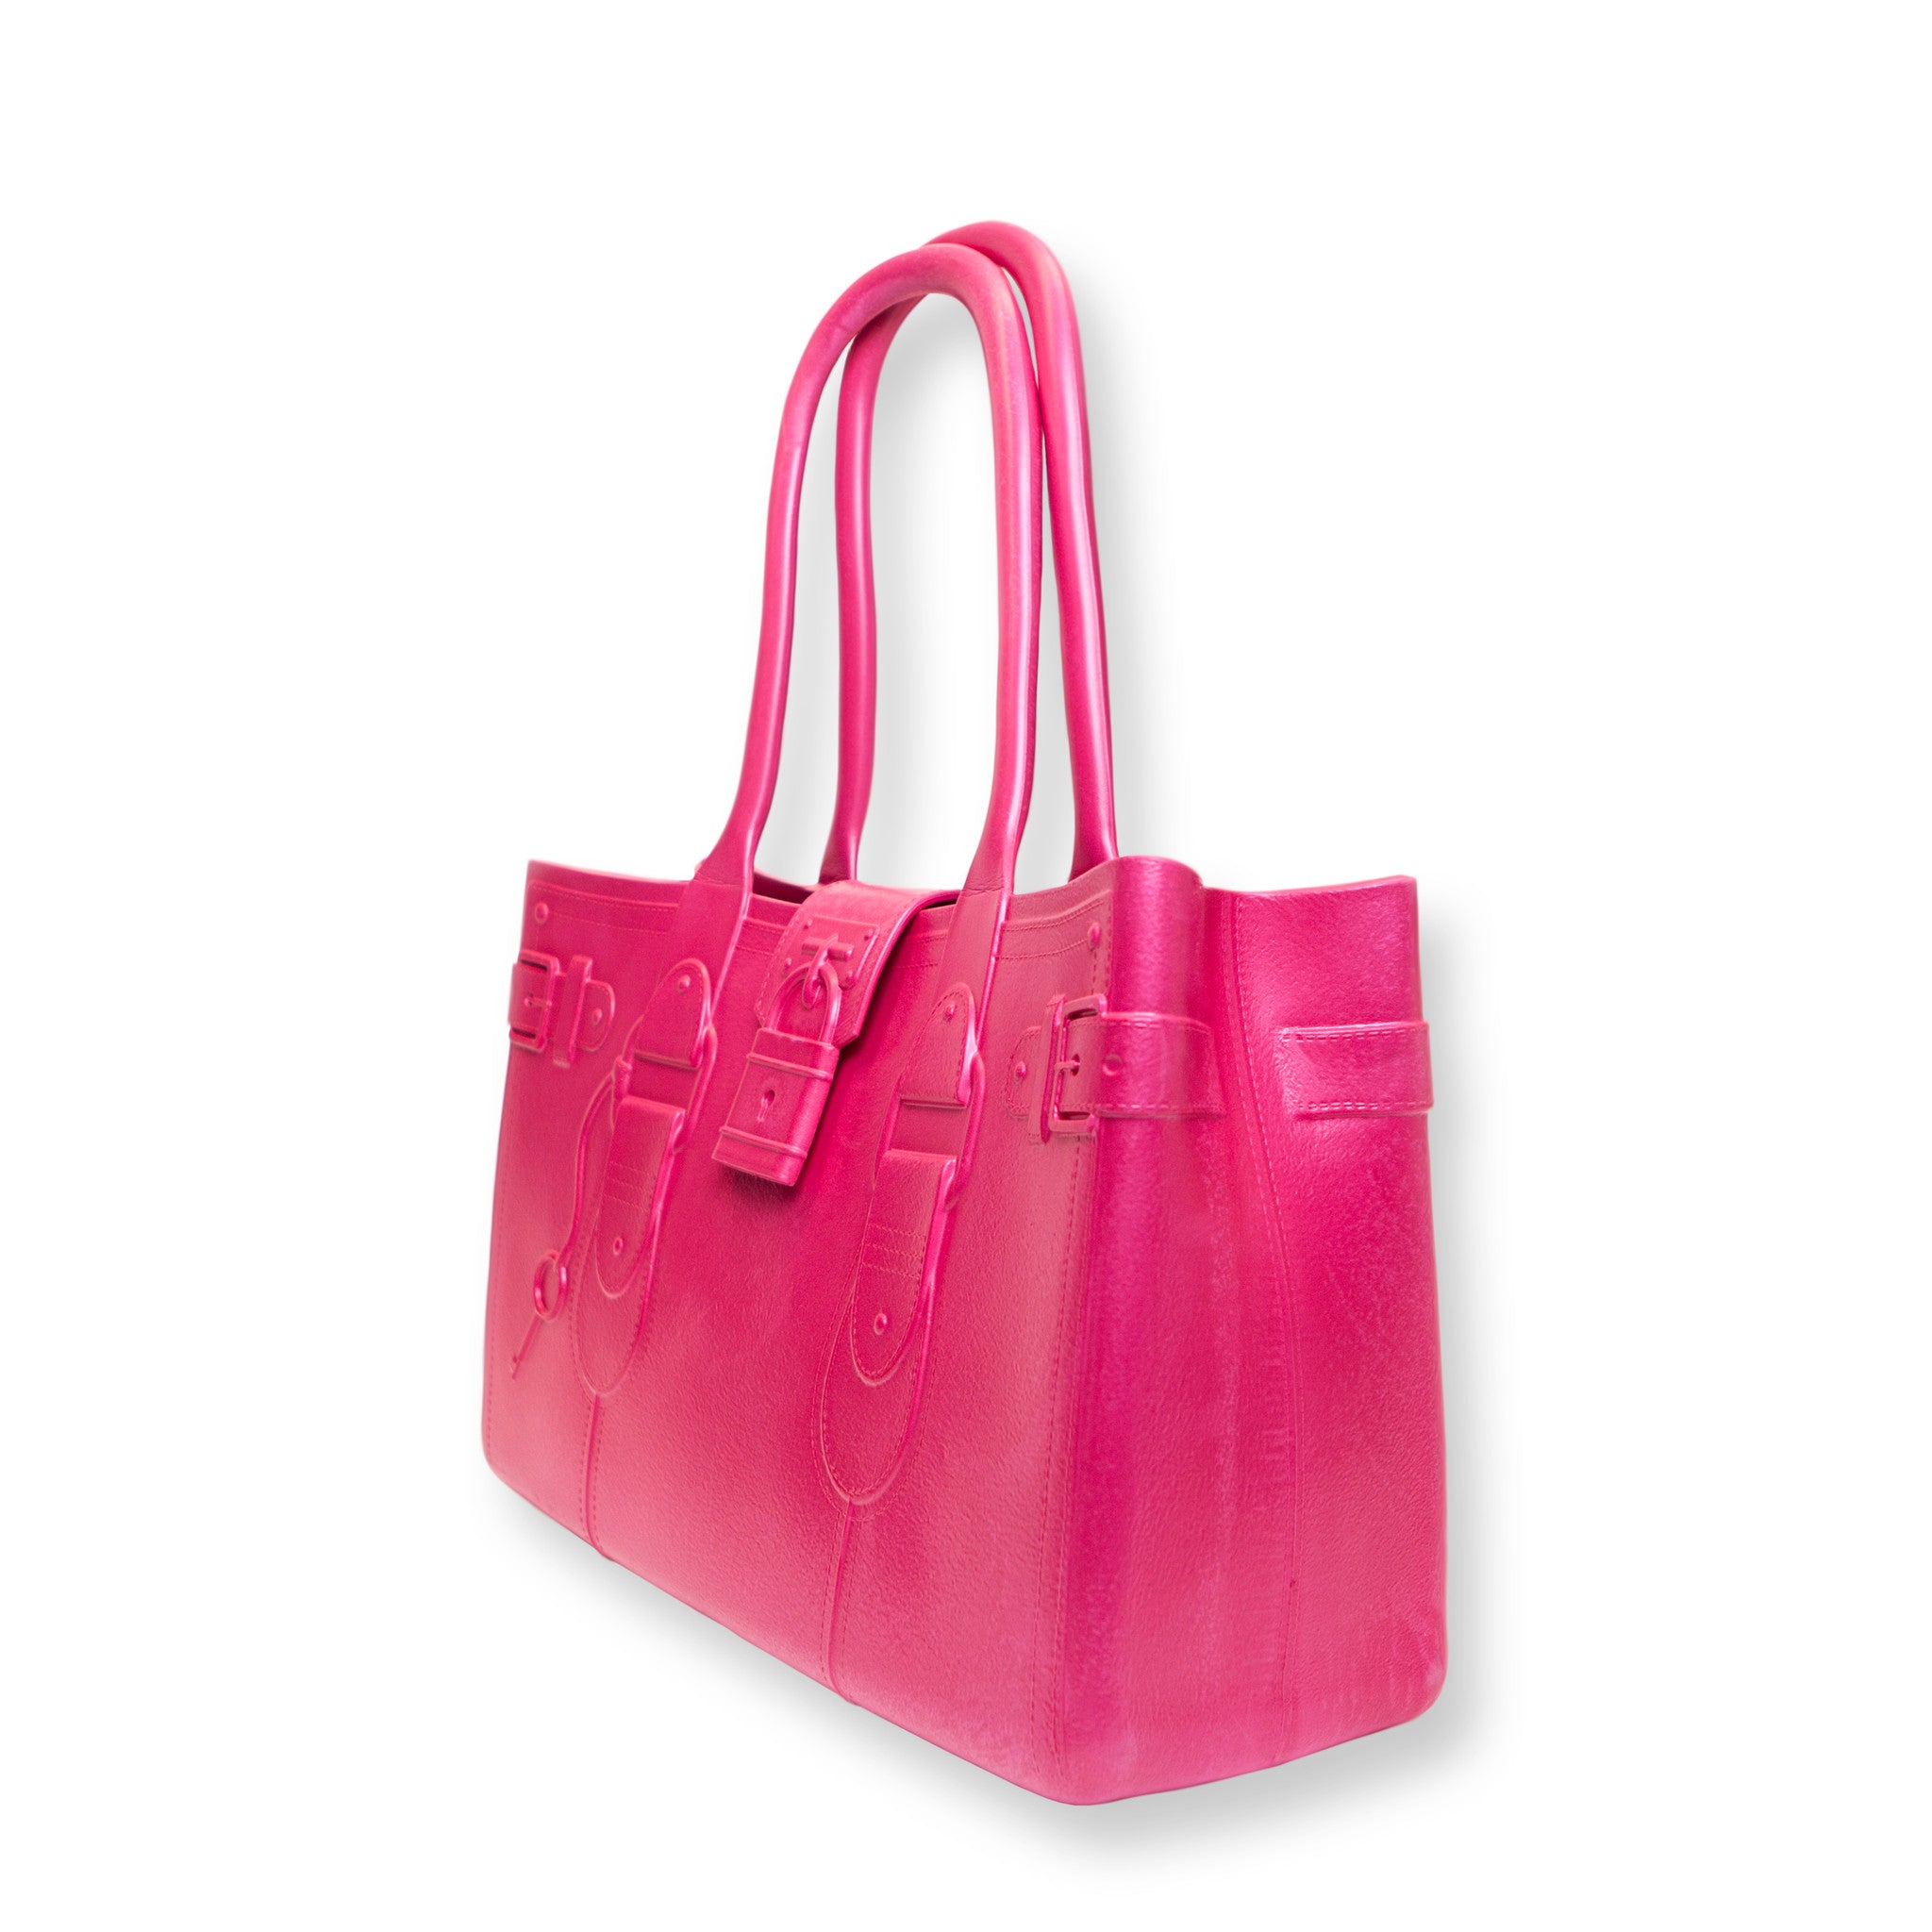 Model M. Tourmaline (pink) from Great Bag Co. #GreatBag – GREAT BAG CO ...